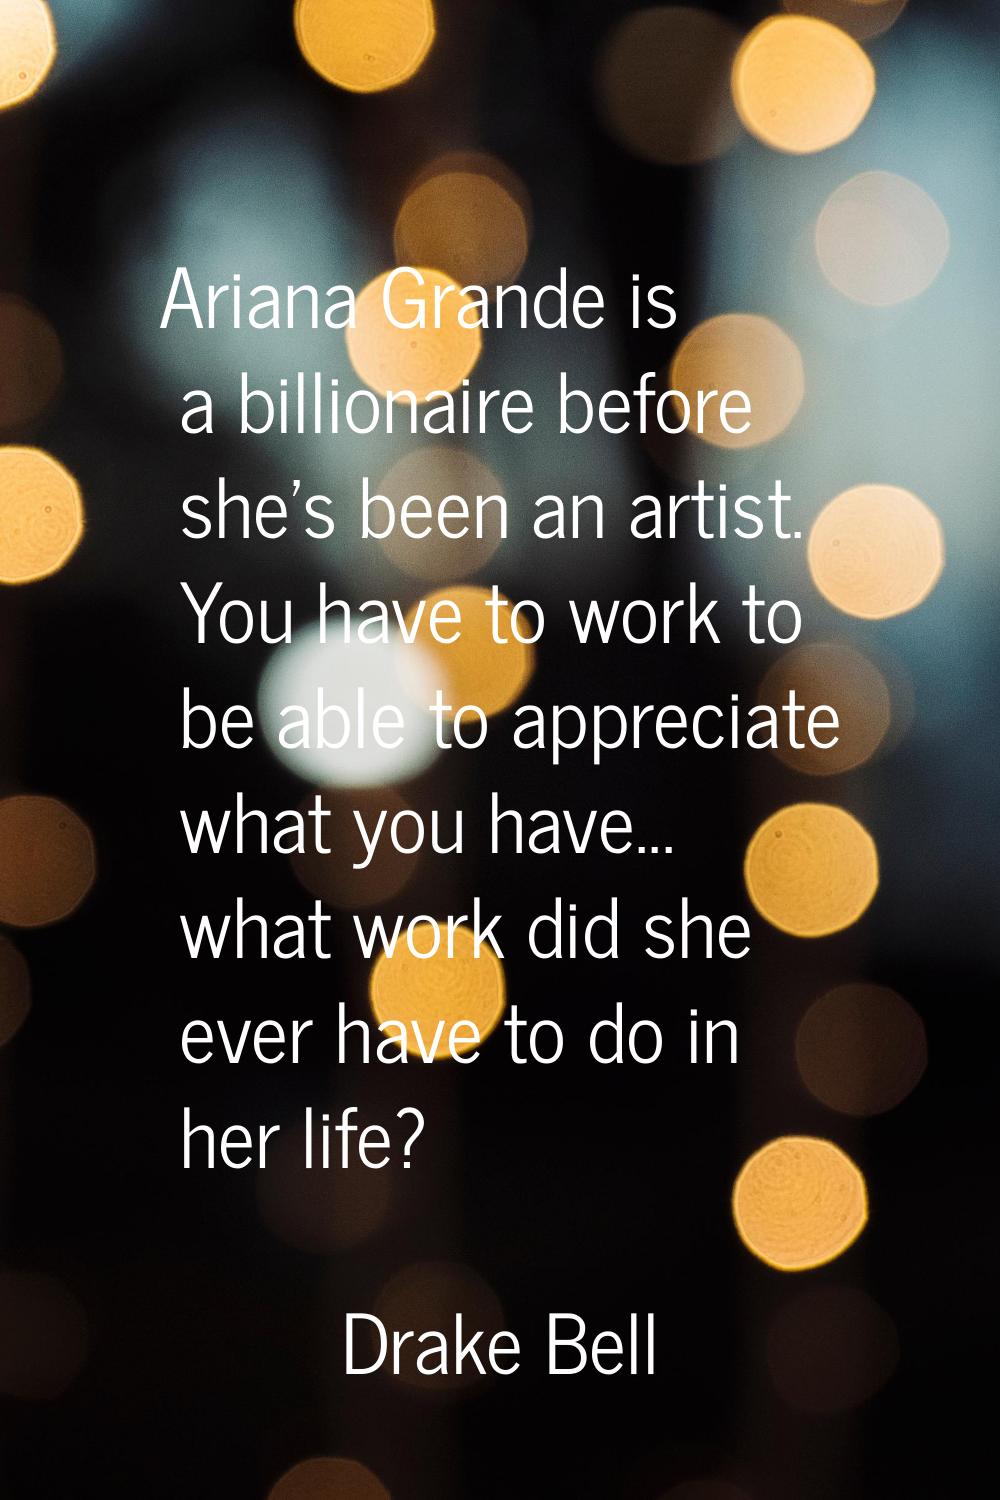 Ariana Grande is a billionaire before she's been an artist. You have to work to be able to apprecia